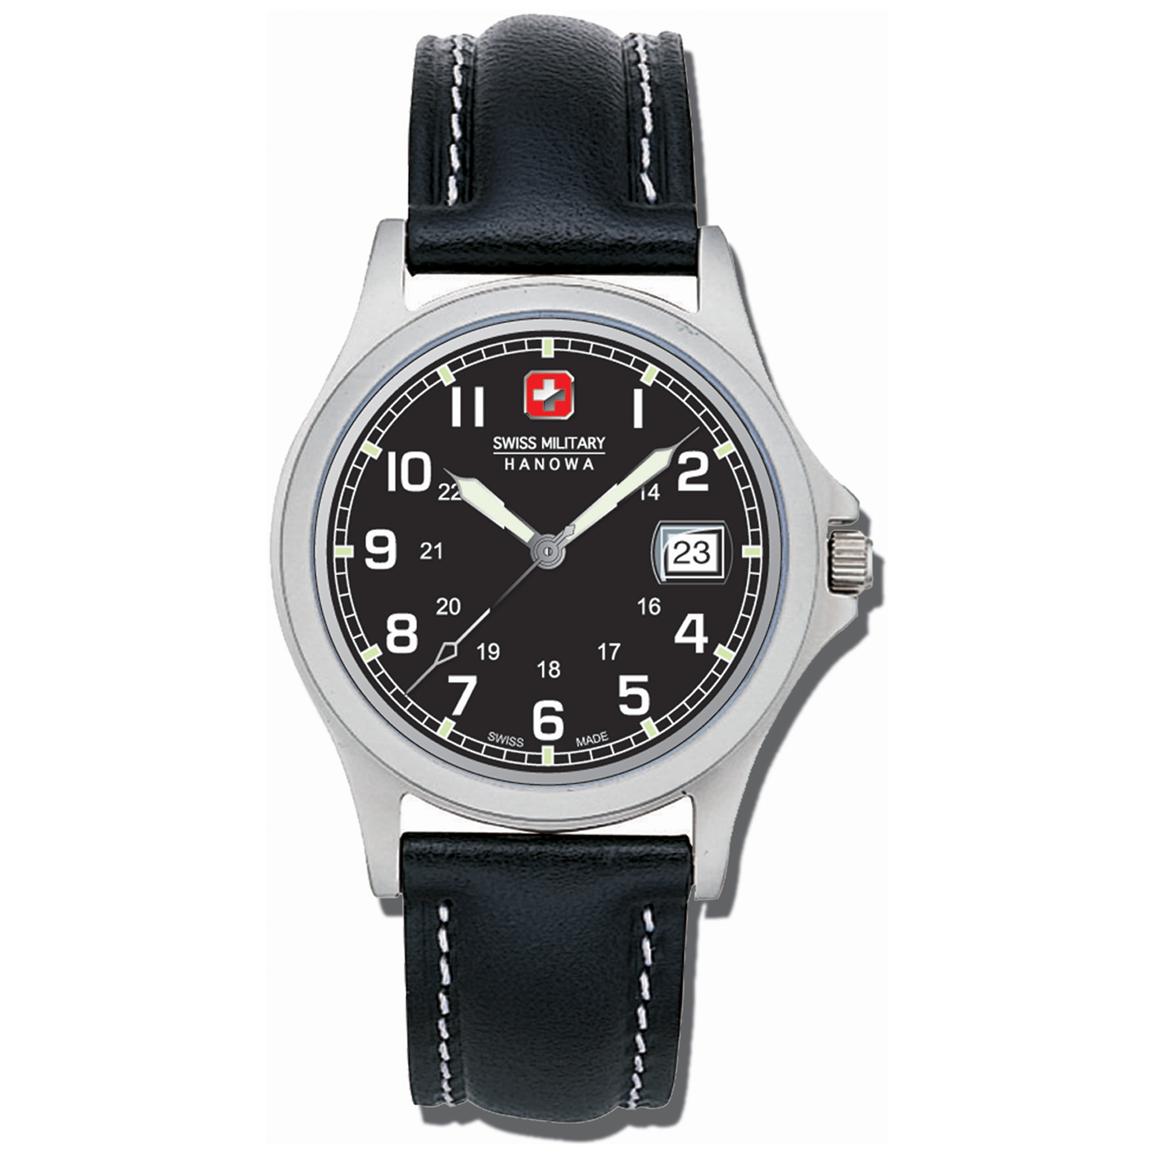 Men's Swiss Military HanowaÂ® Conquest Black Dial Watch - 150853, Watches at Sportsman's Guide